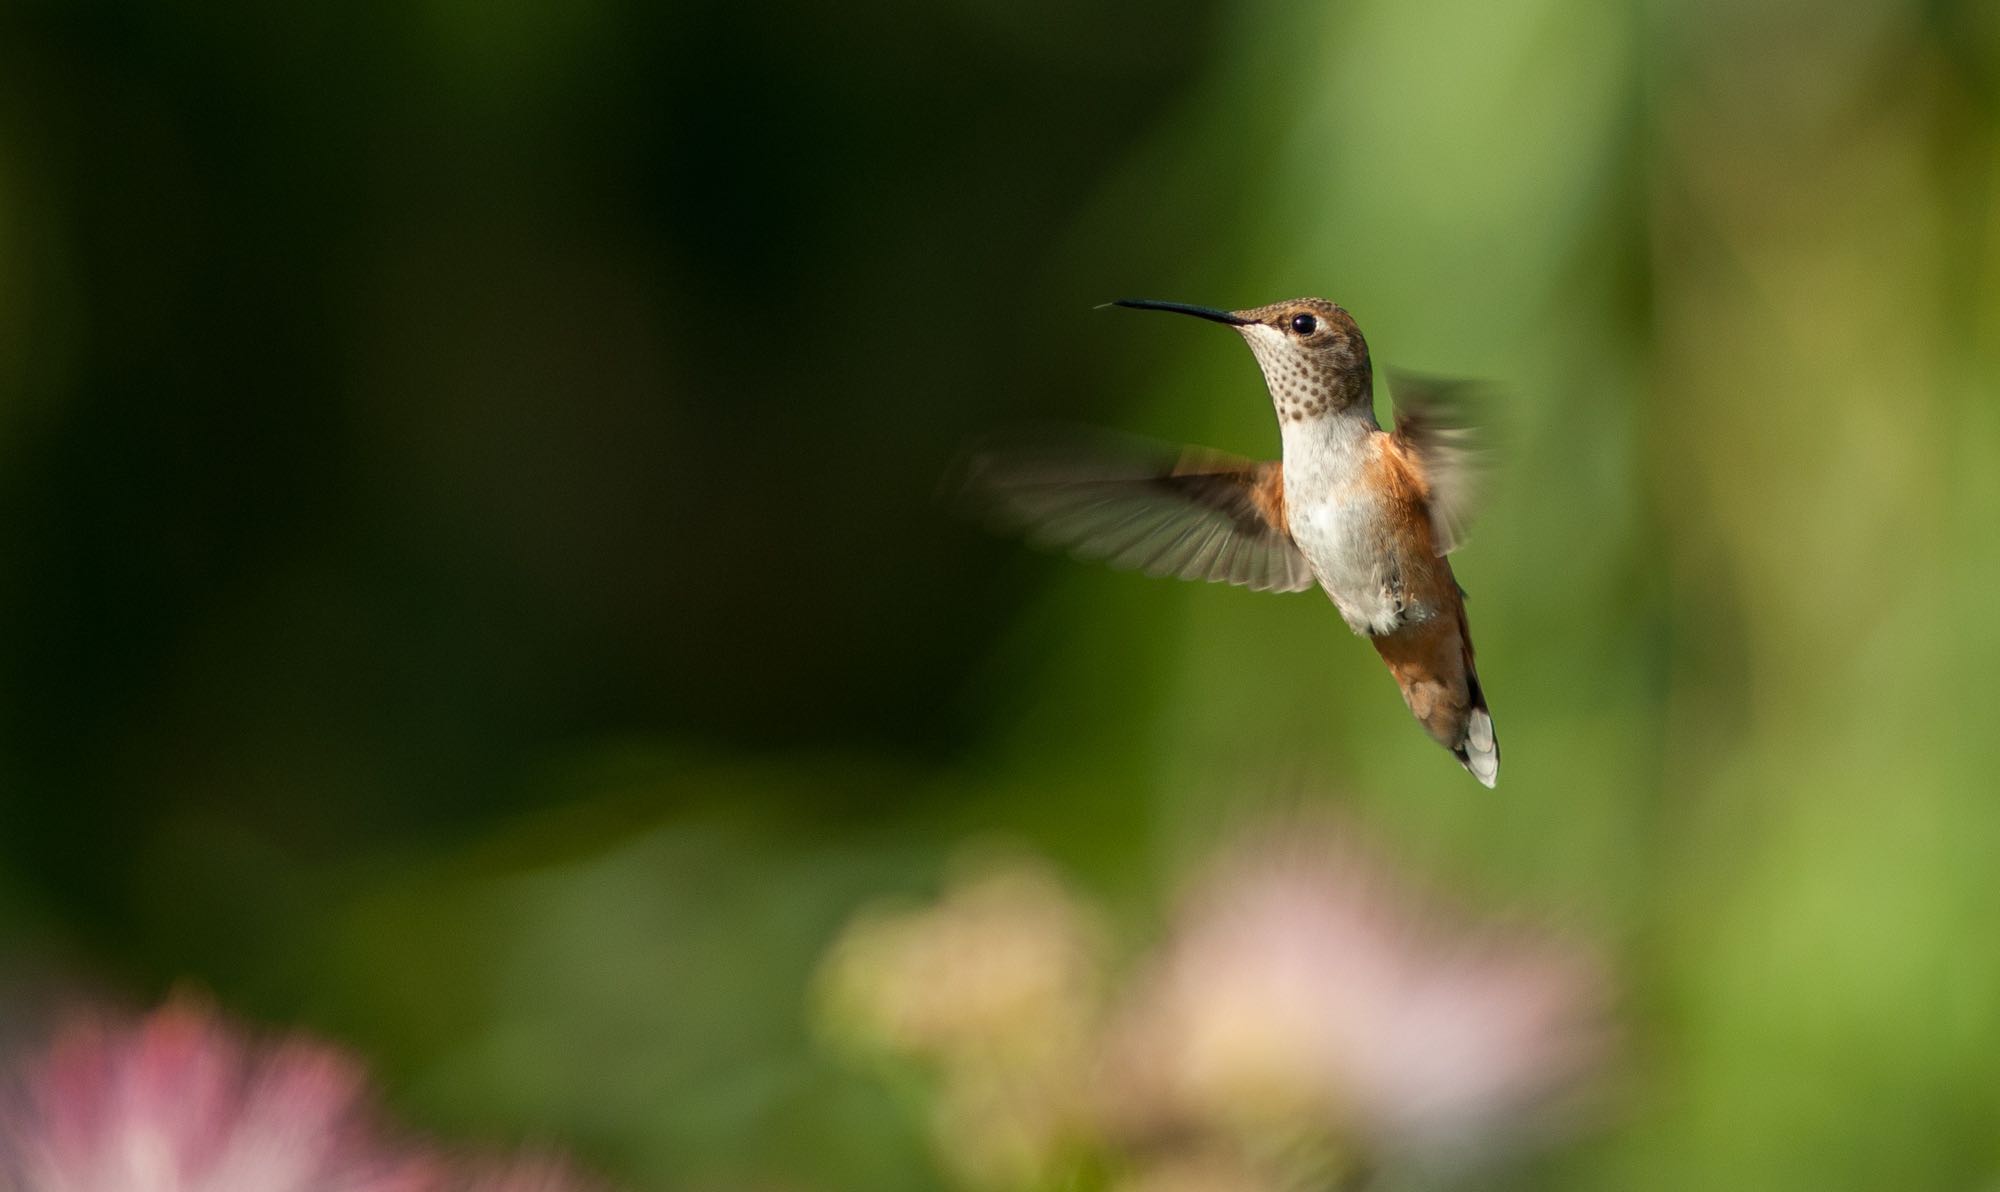 A hummingbird hovers near a flower in the gardens at Country Willows Inn & Estate in Ashland, Oregon.